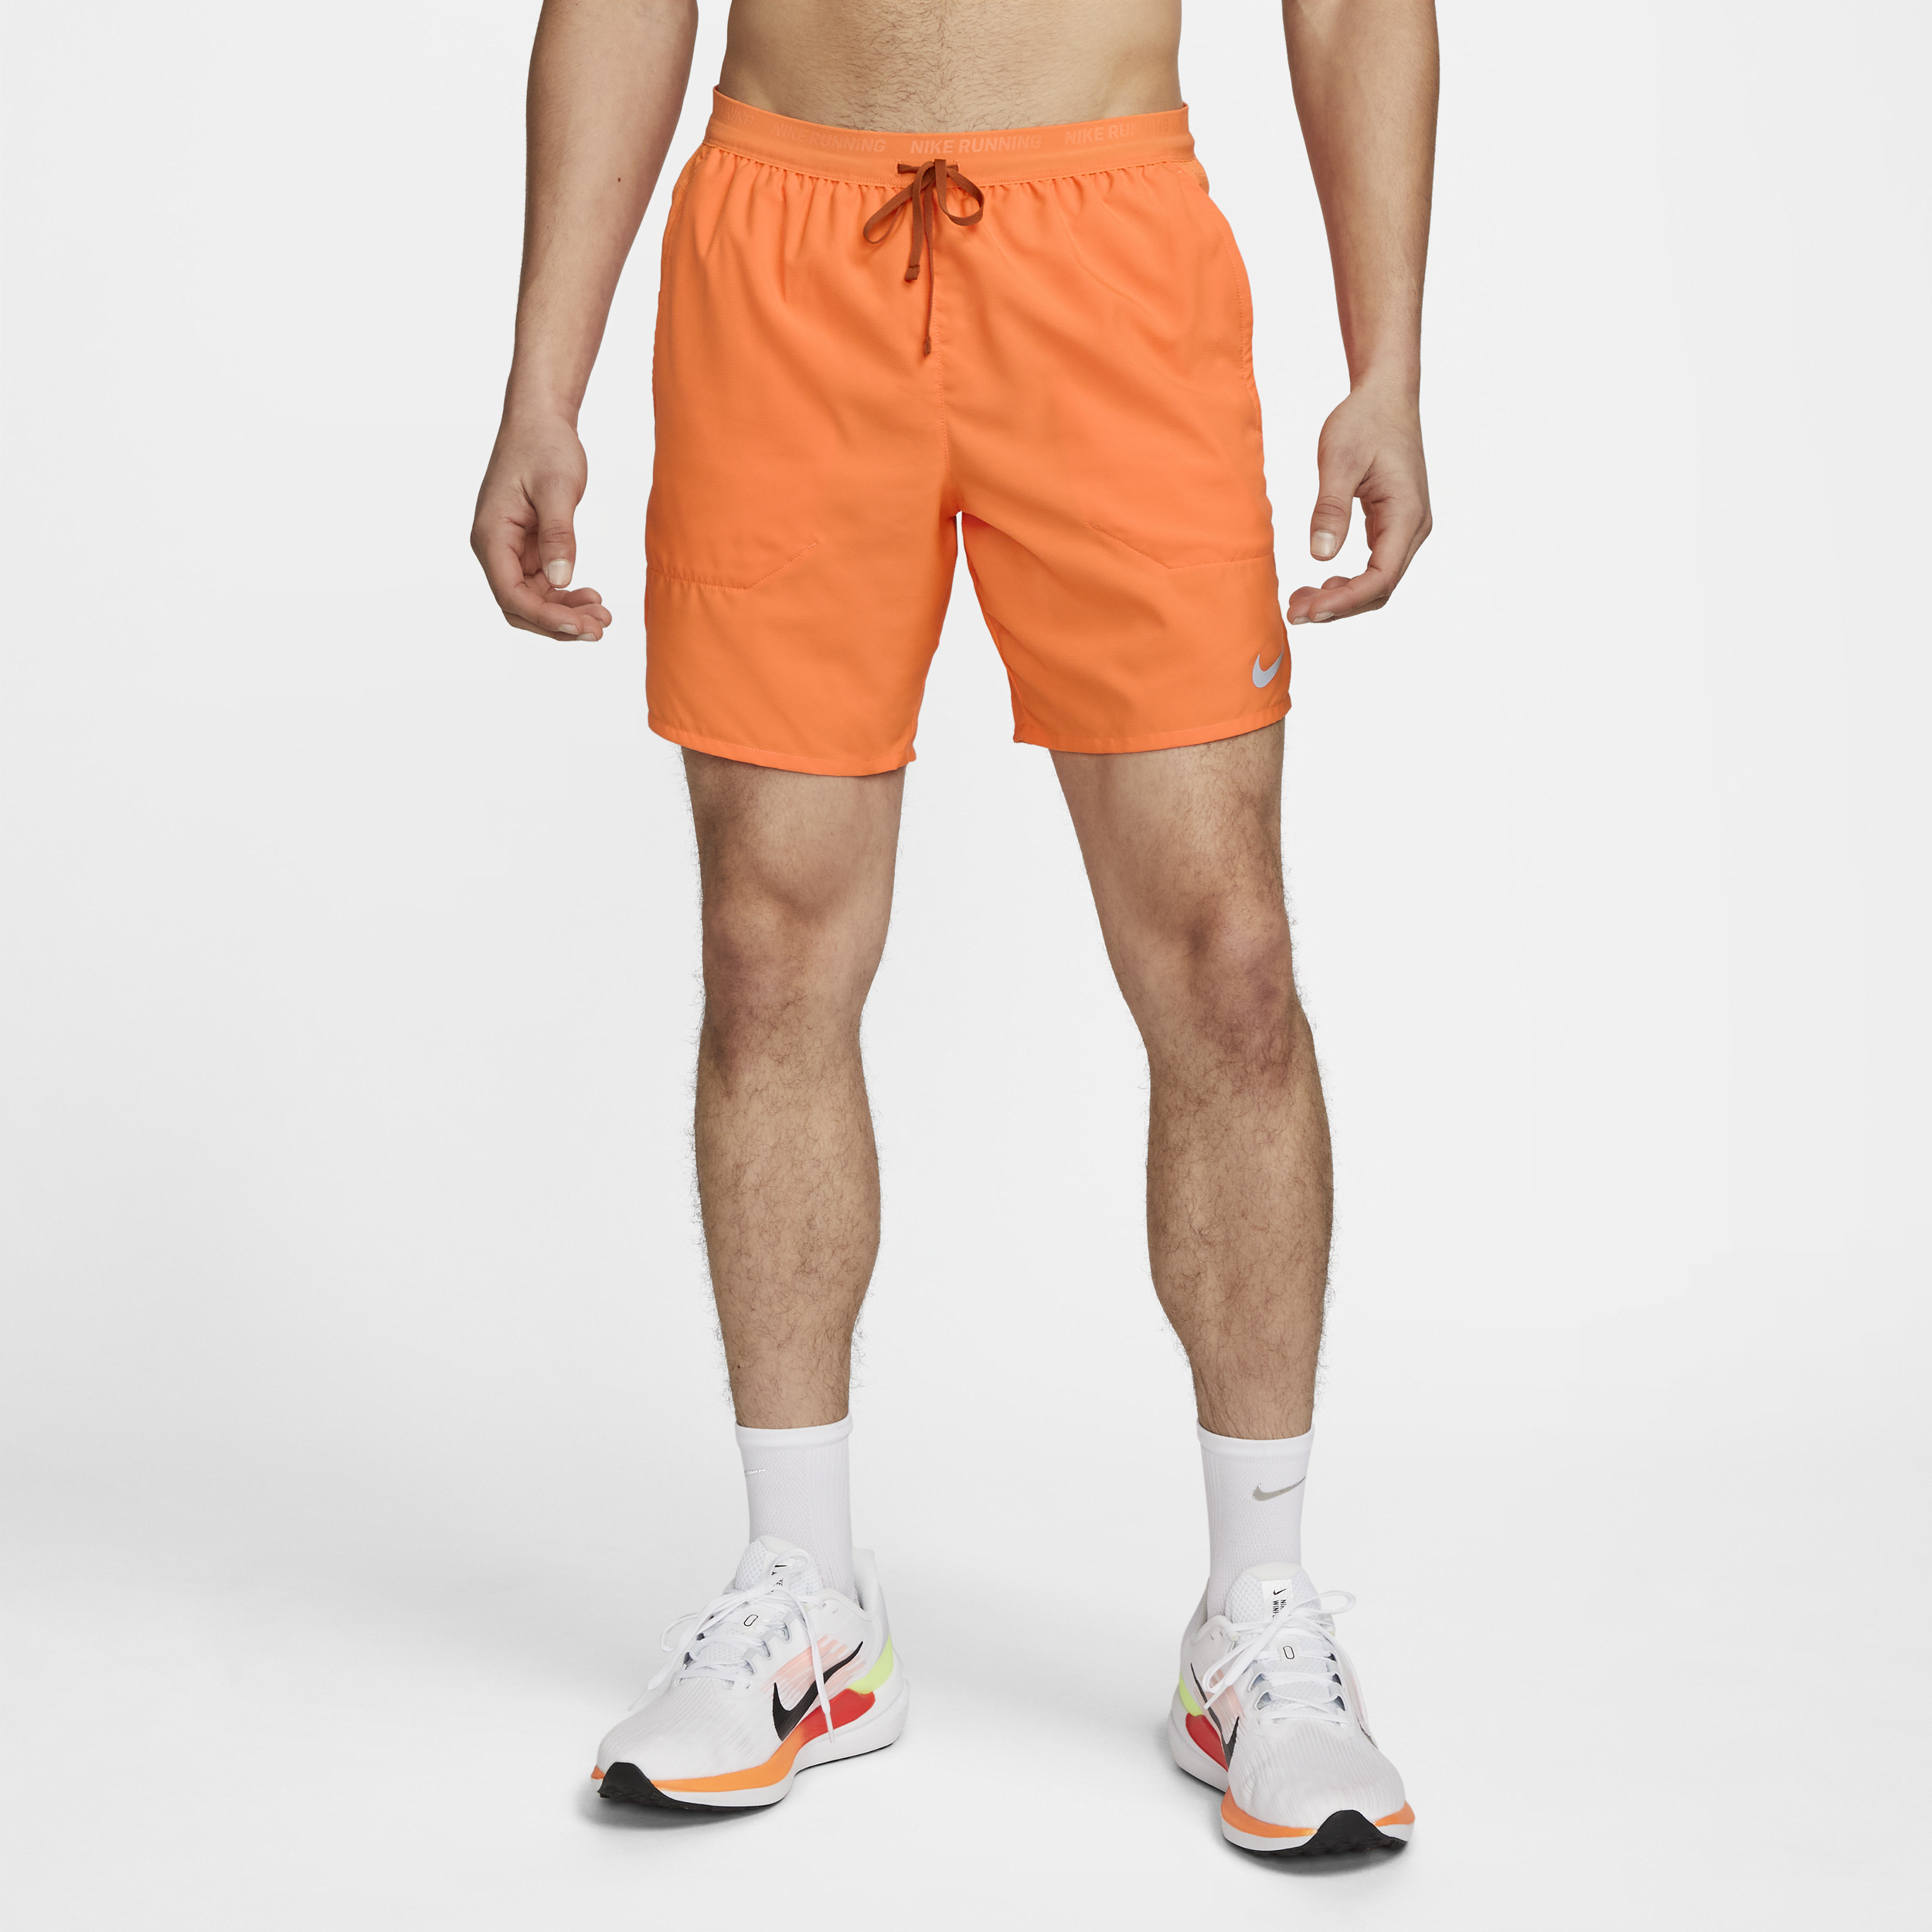 NIKE MEN'S STRIDE DRI-FIT 7" BRIEF-LINED RUNNING SHORTS,1009765270